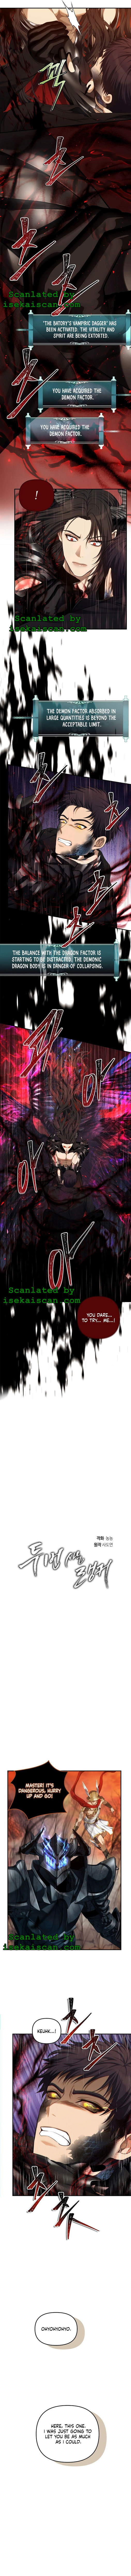 Ranker Who Lives A Second Time Chapter 140 page 3 - Mangakakalot